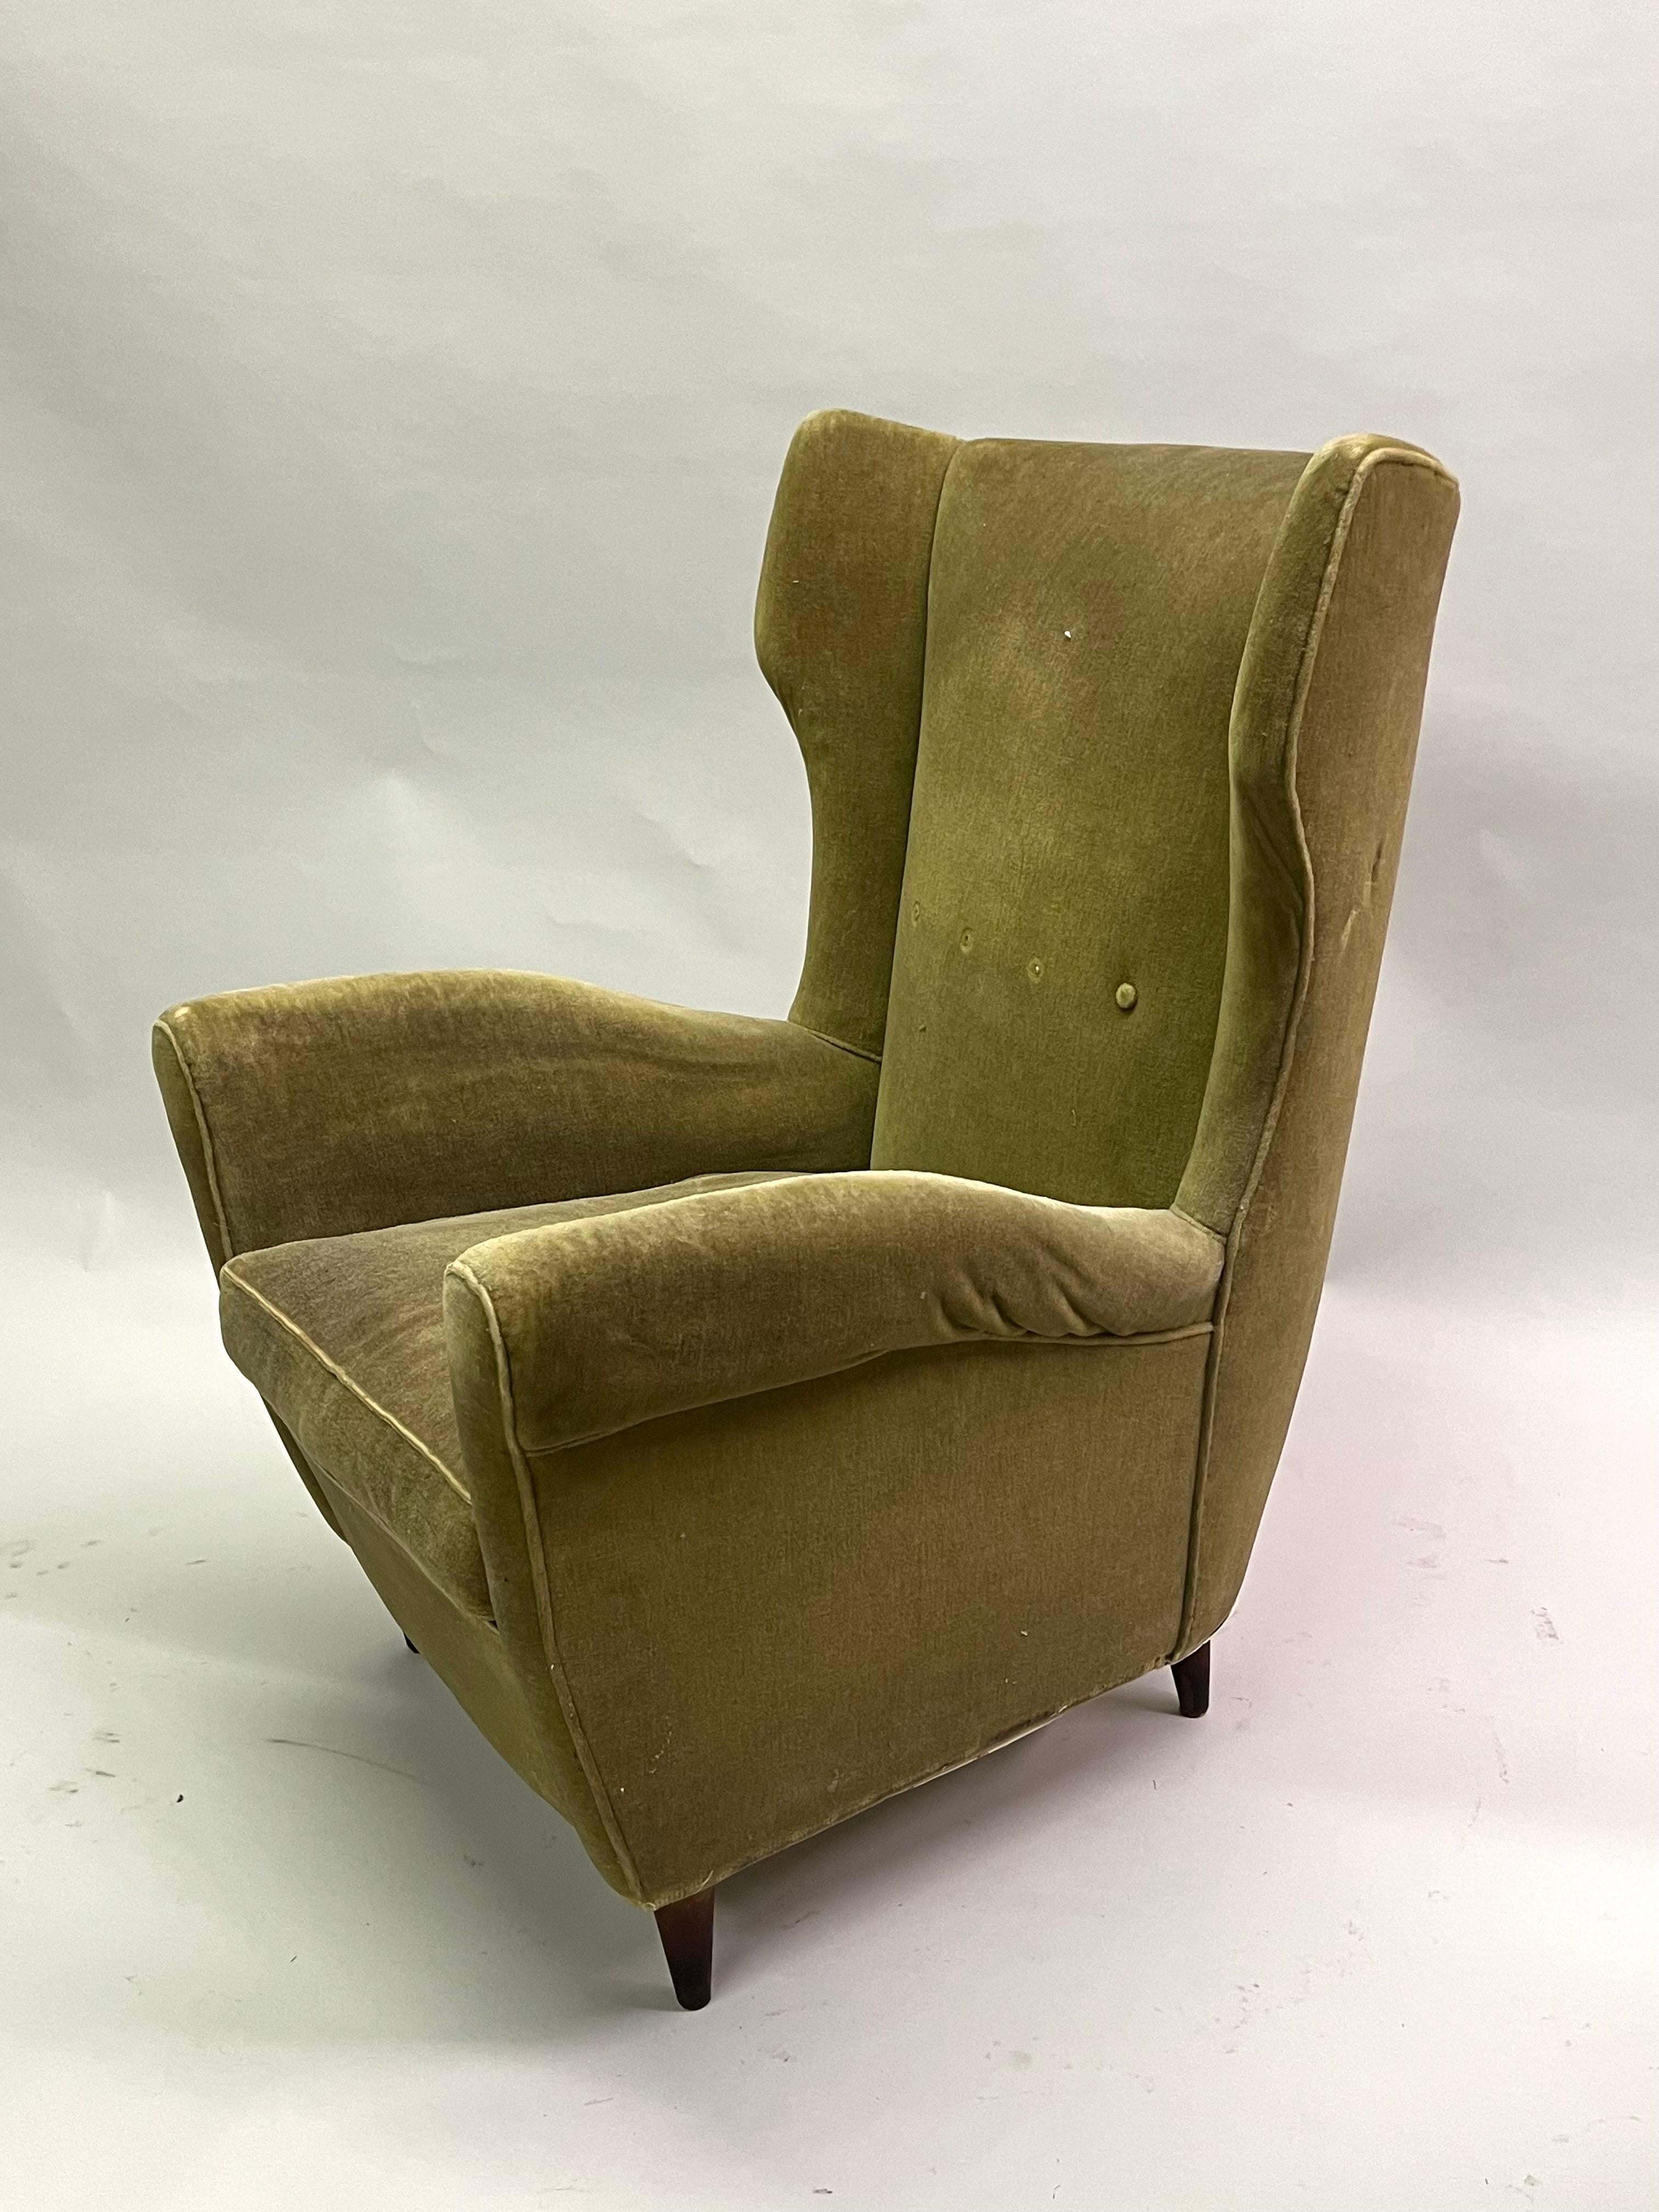 Pair of Italian Mid-Century Wingback Lounge Chairs Attr. to Gio Ponti, Model 512 For Sale 4